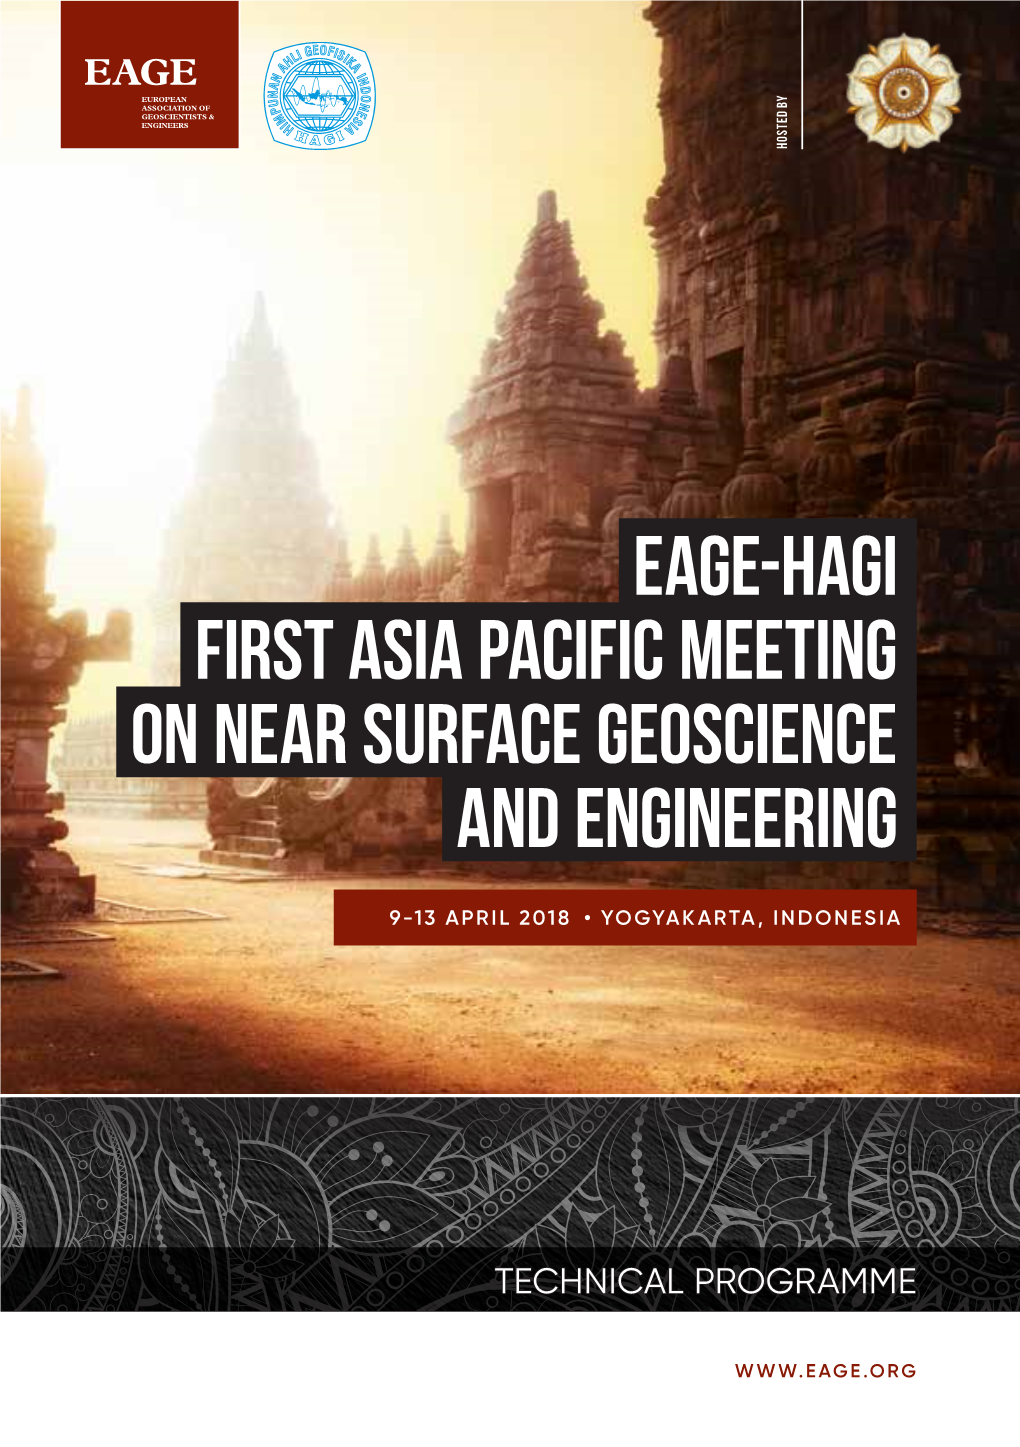 Eage-Hagi First Asia Pacific Meeting on Near Surface Geoscience and Engineering